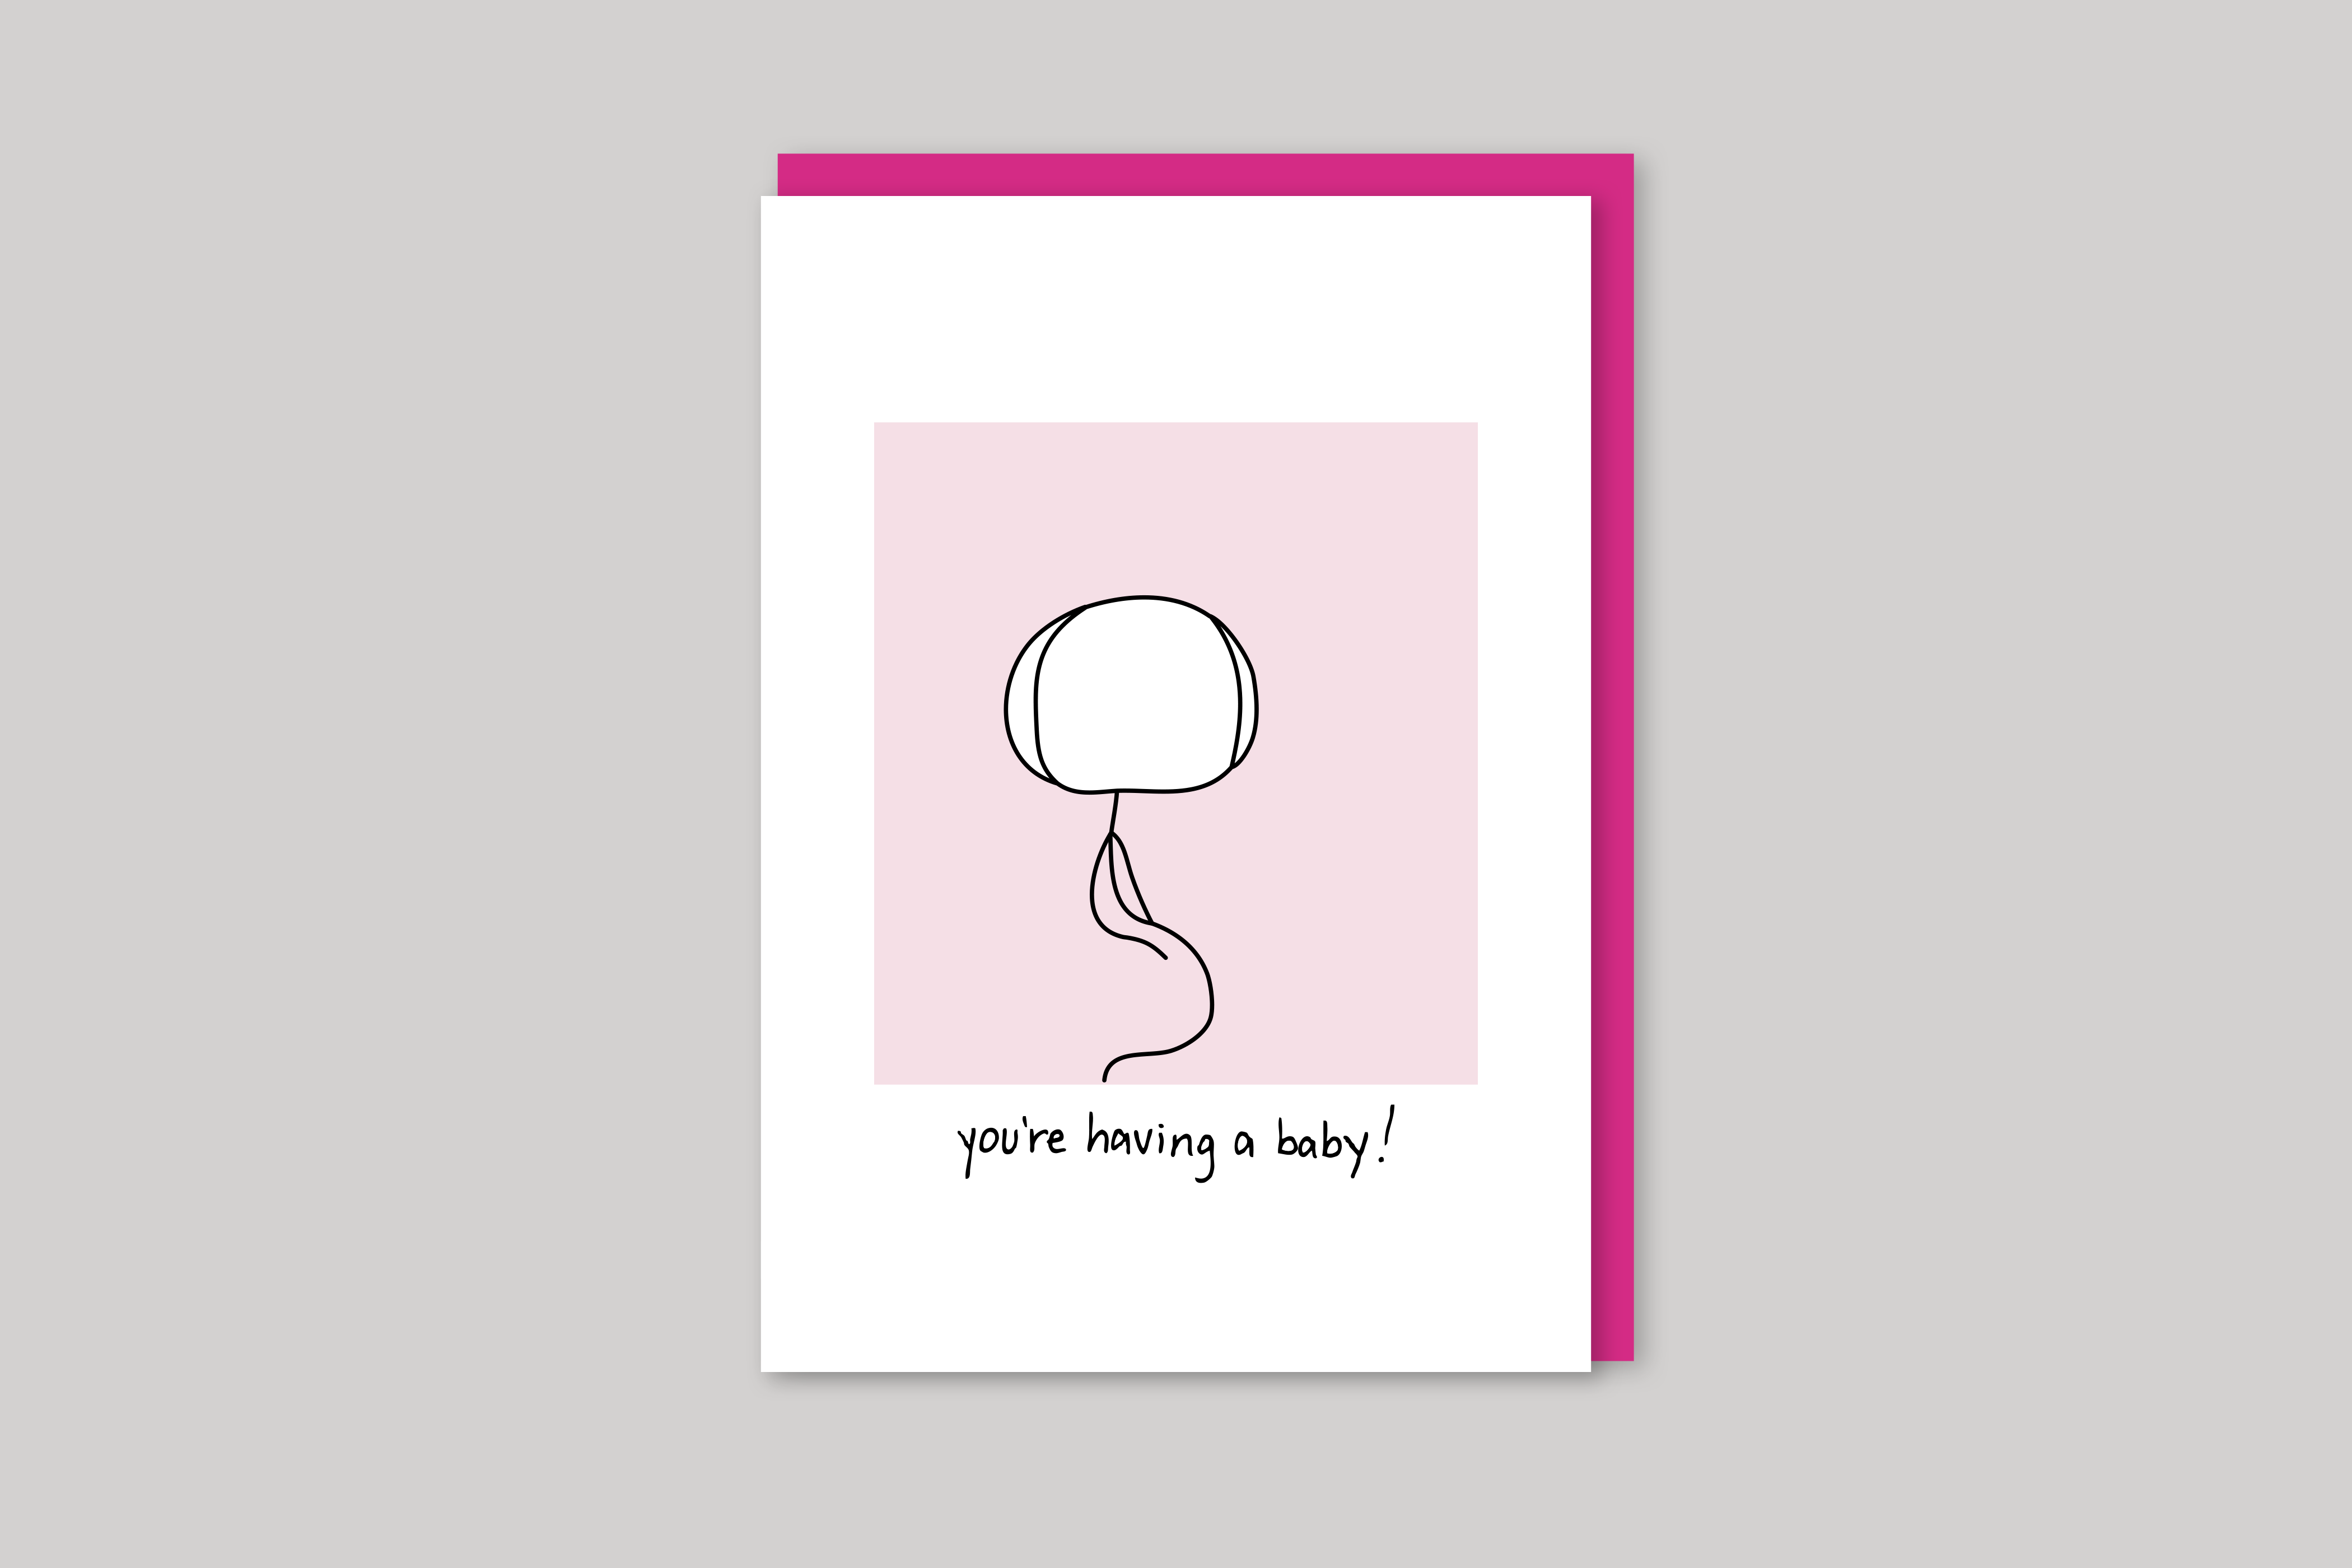 You're Having a Baby! new baby card humorous illustration from Mean Cards range of greeting cards by Icon, back page.